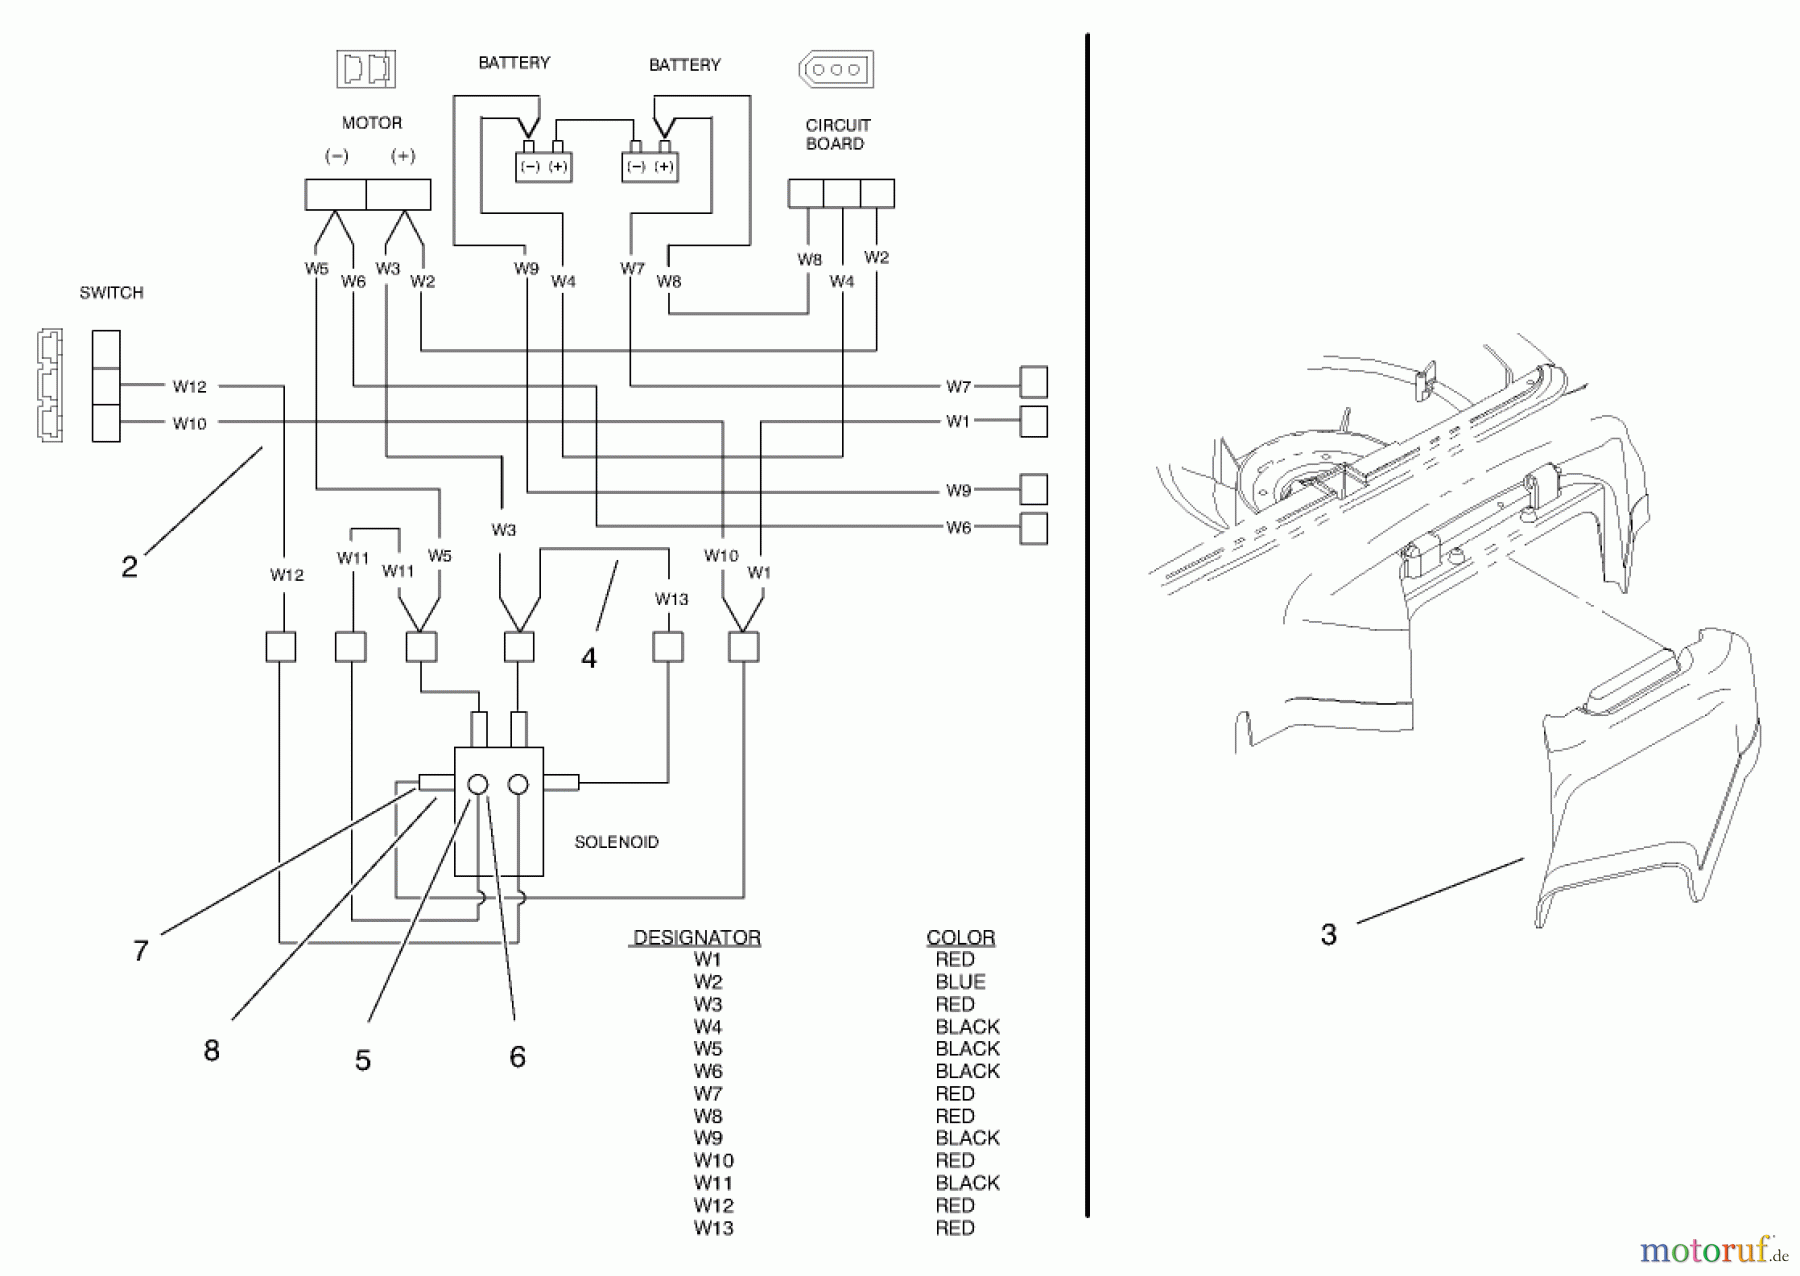  Toro Neu Mowers, Electric 20648 - Toro Carefree Electric WPM, 24 VDC, 1998 (89000001-89999999) ELECTRICAL WIRE DIAGRAM AND SIDE DESCHARGE CHUTE